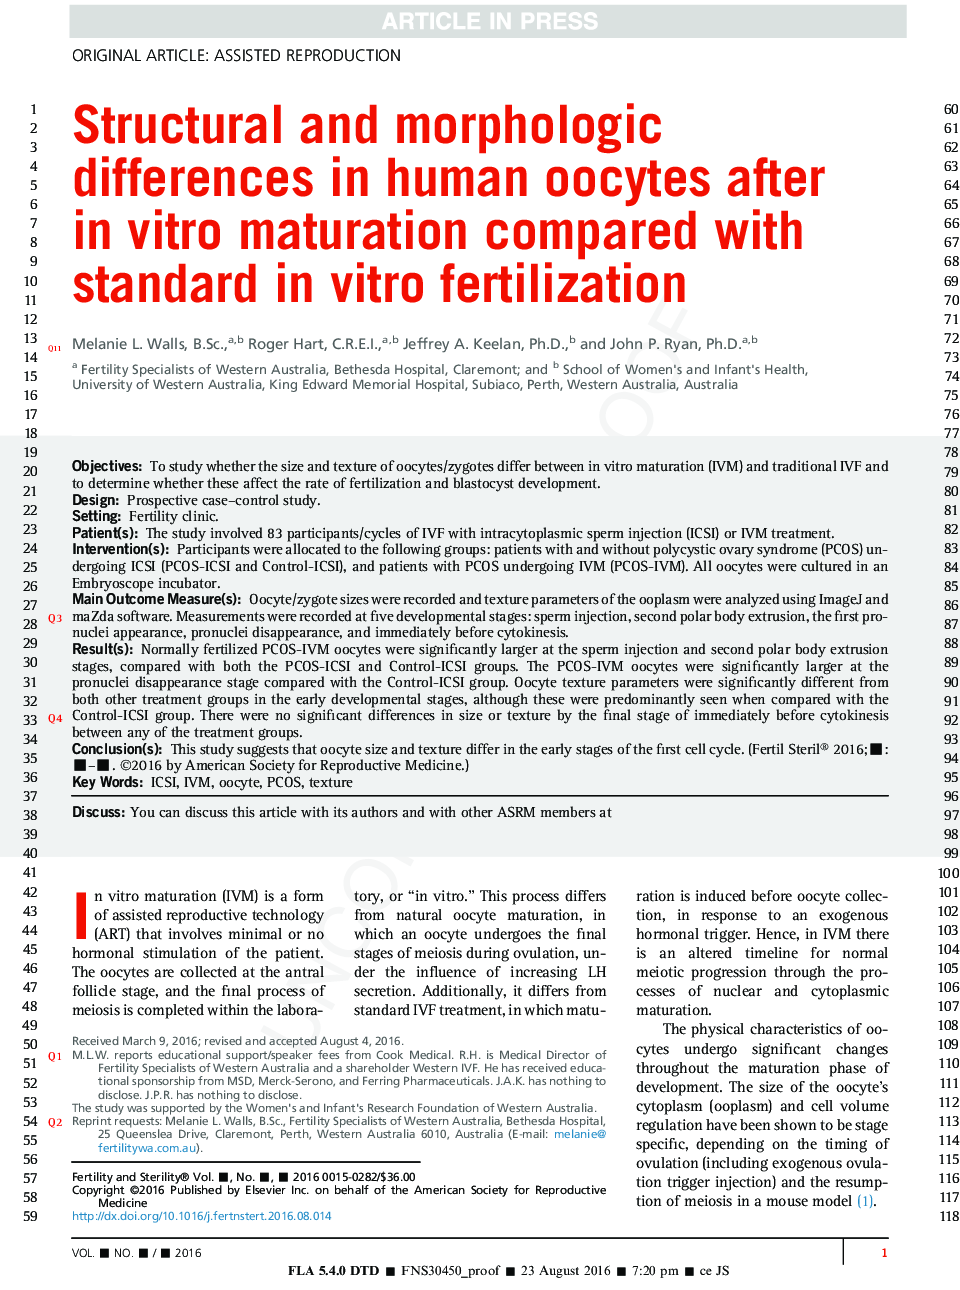 Structural and morphologic differences in human oocytes after inÂ vitro maturation compared with standard inÂ vitro fertilization